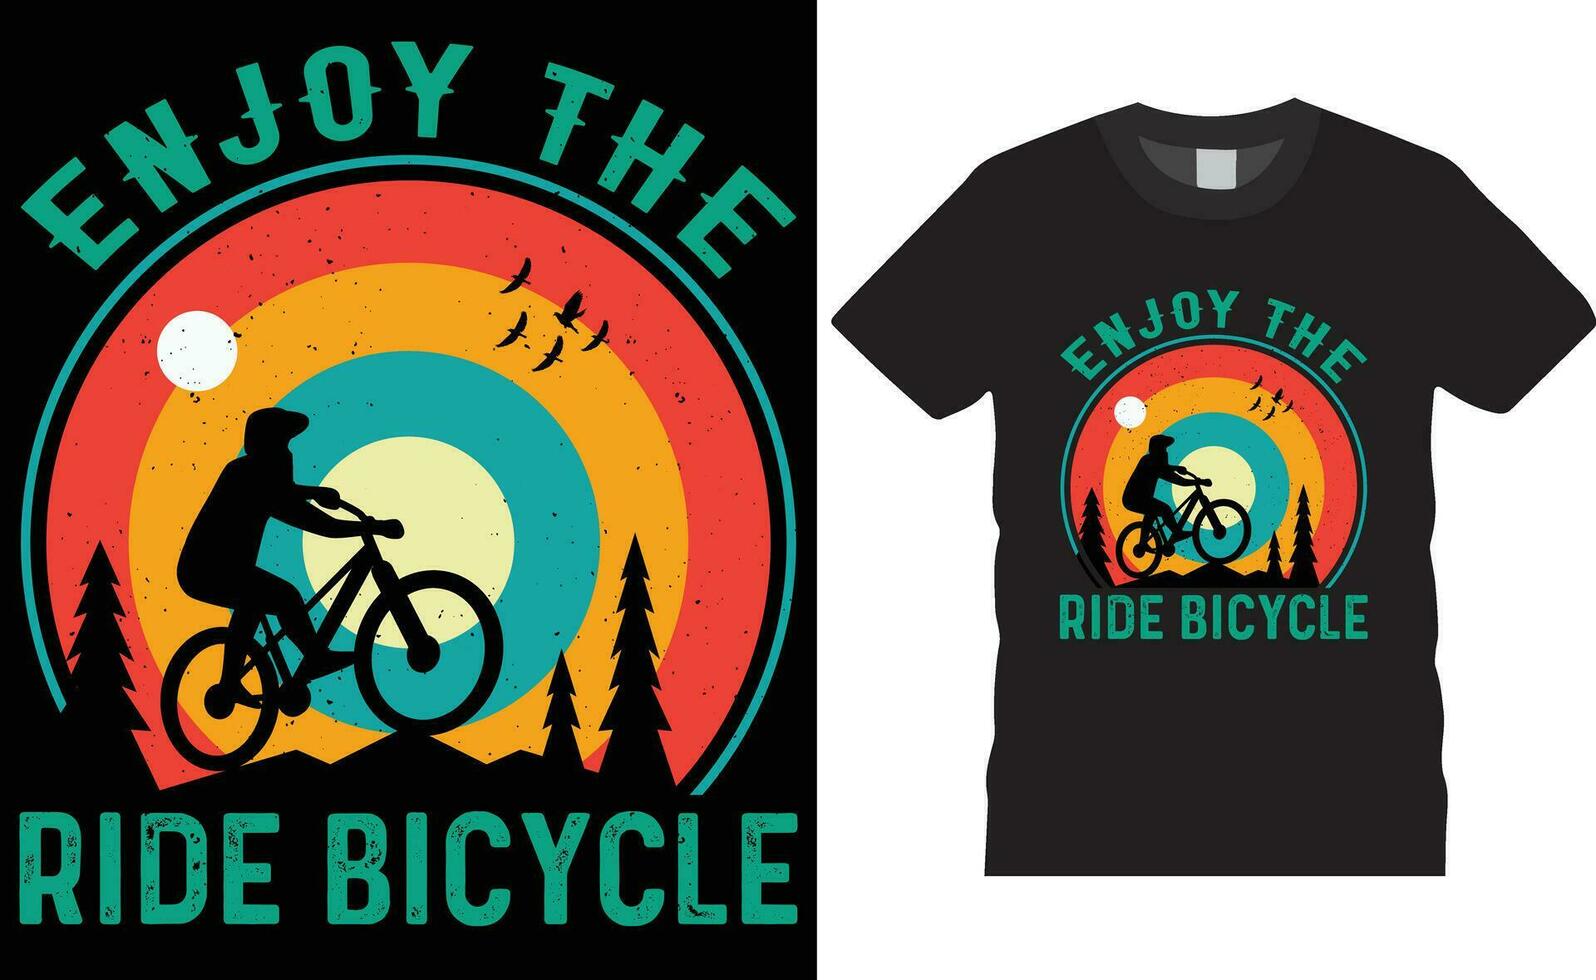 Enjoy the ride bicycle Bicycle T-Shirt Design vector